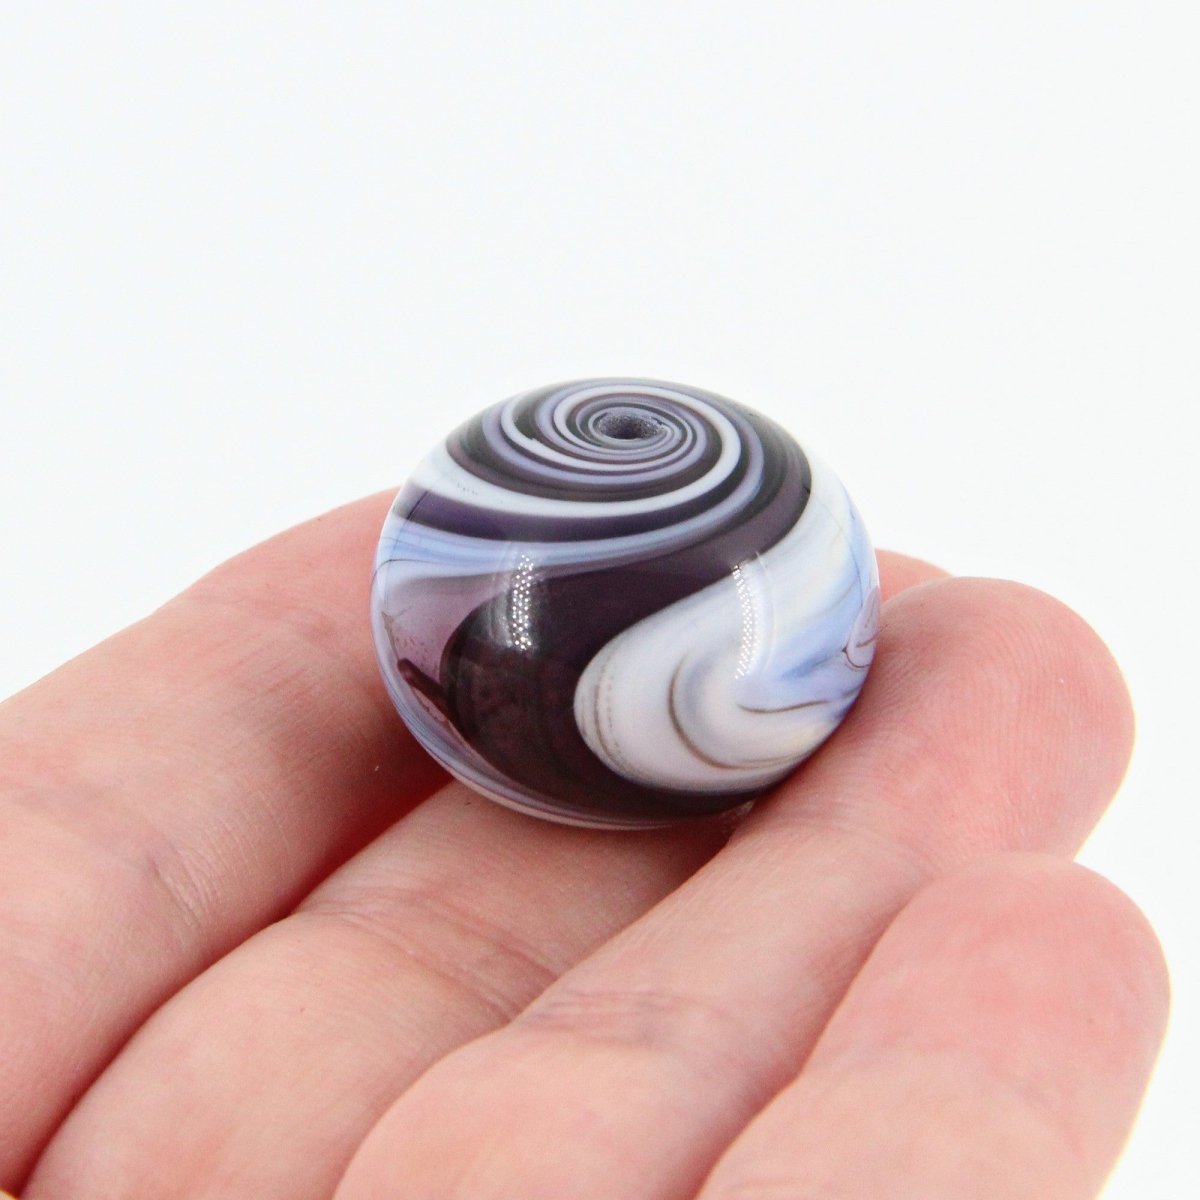 Purple, Blue, and White Striped Statement Bead - Handmade Glass Lampwork, Unique Focal Bead for Pendant, Suncatcher, or Home Decorating